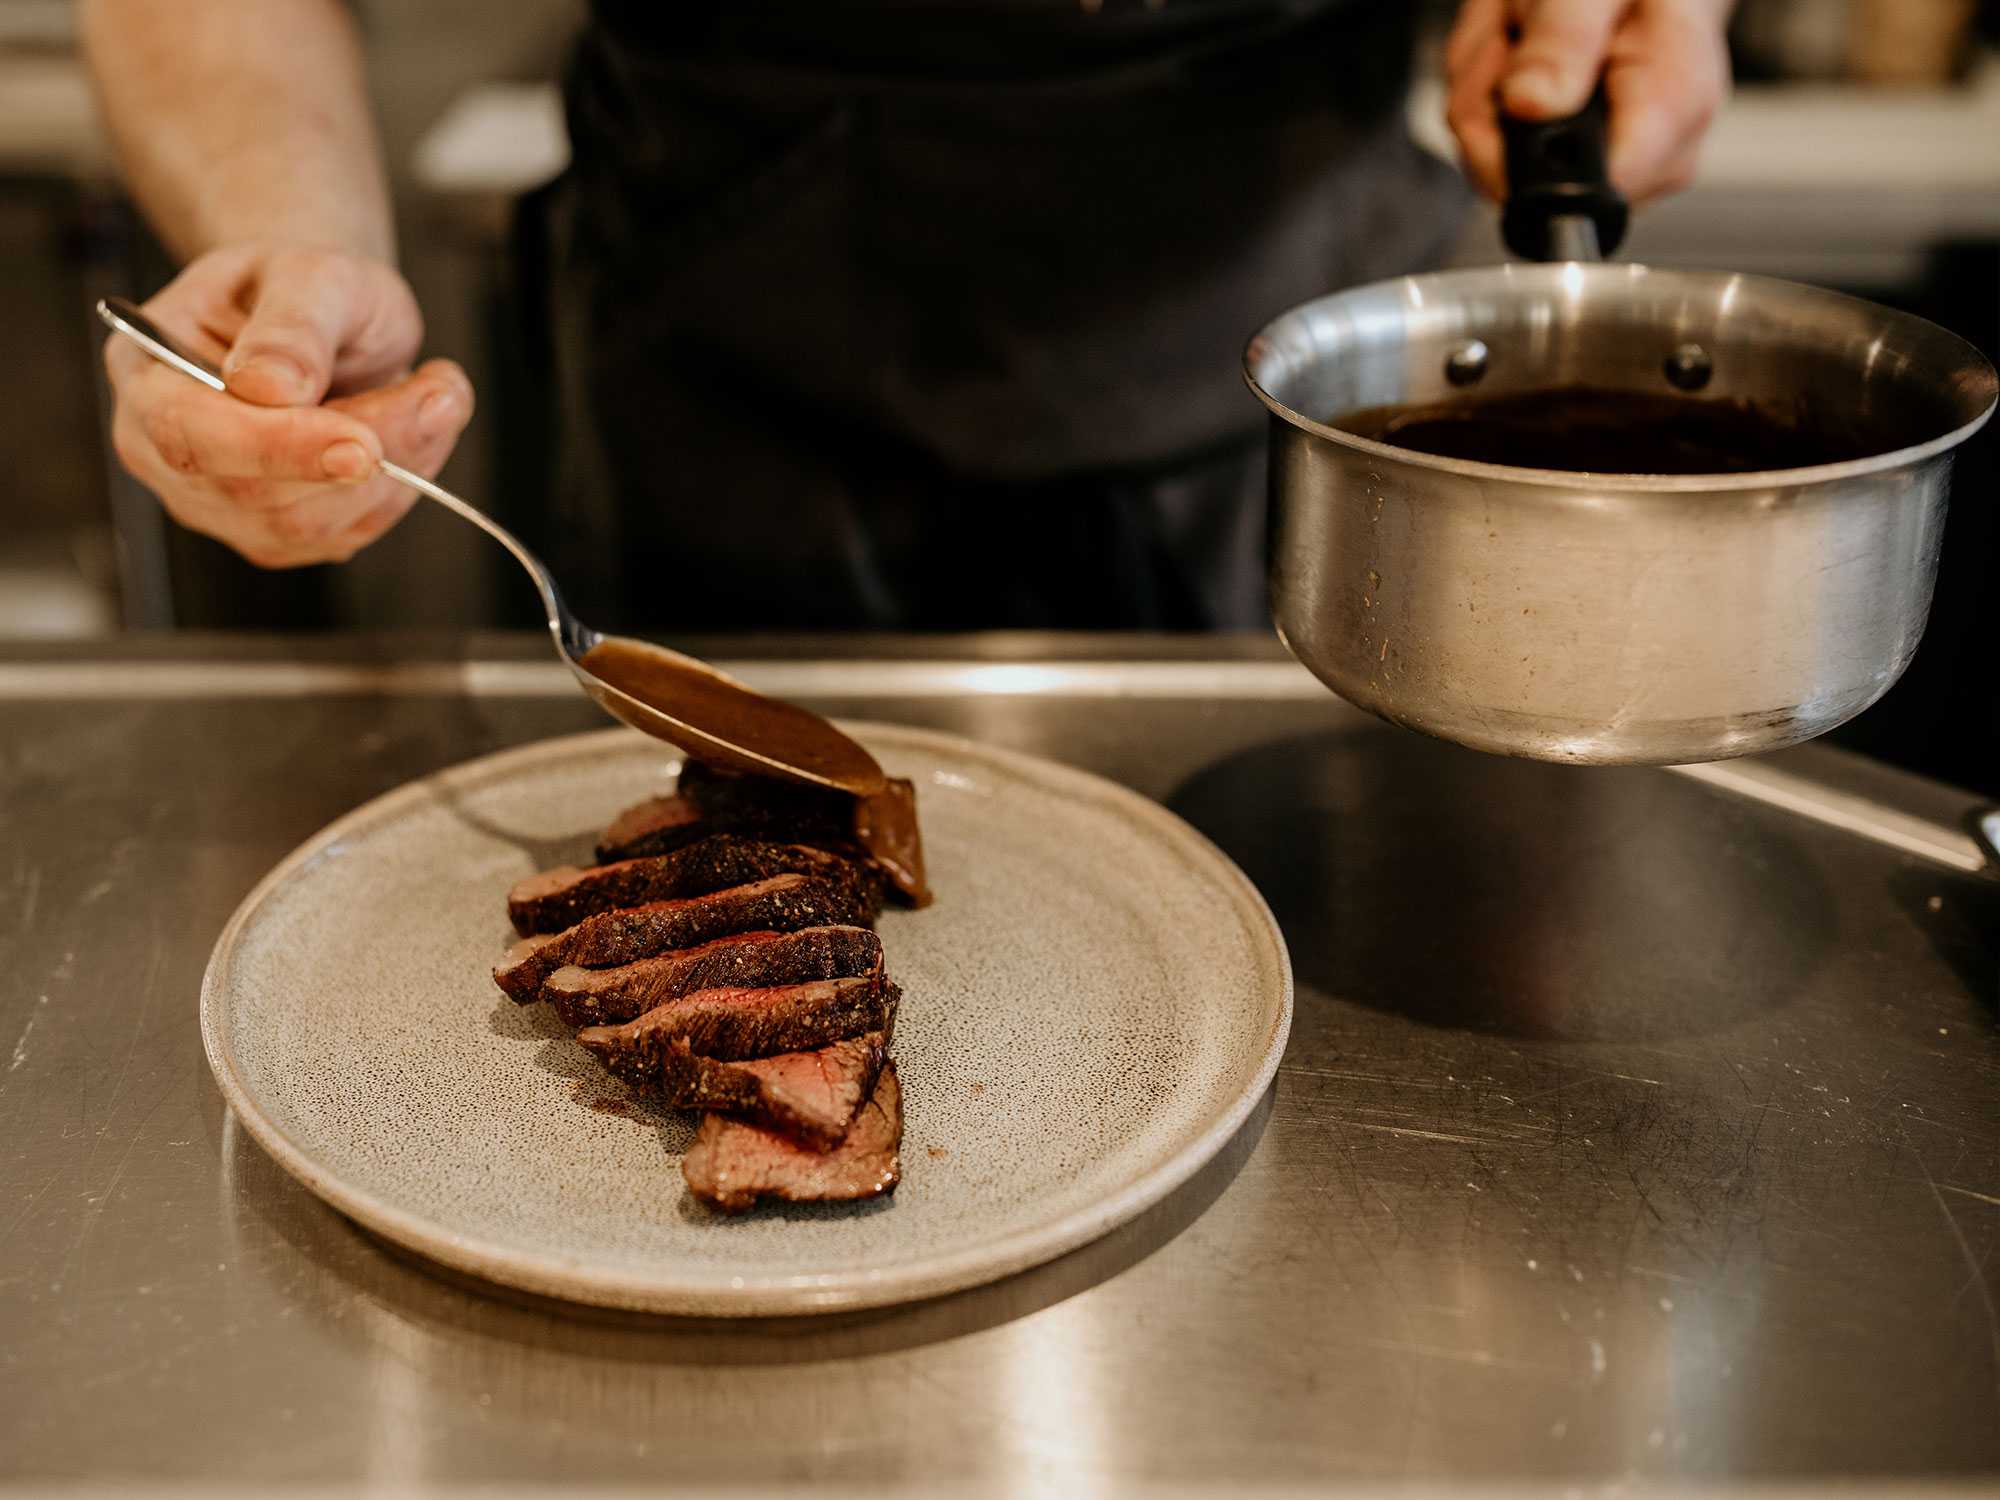 A tight shot of the chef ladling a sauce over a sliced steak. Photo is from our chattanooga photography marketing package.